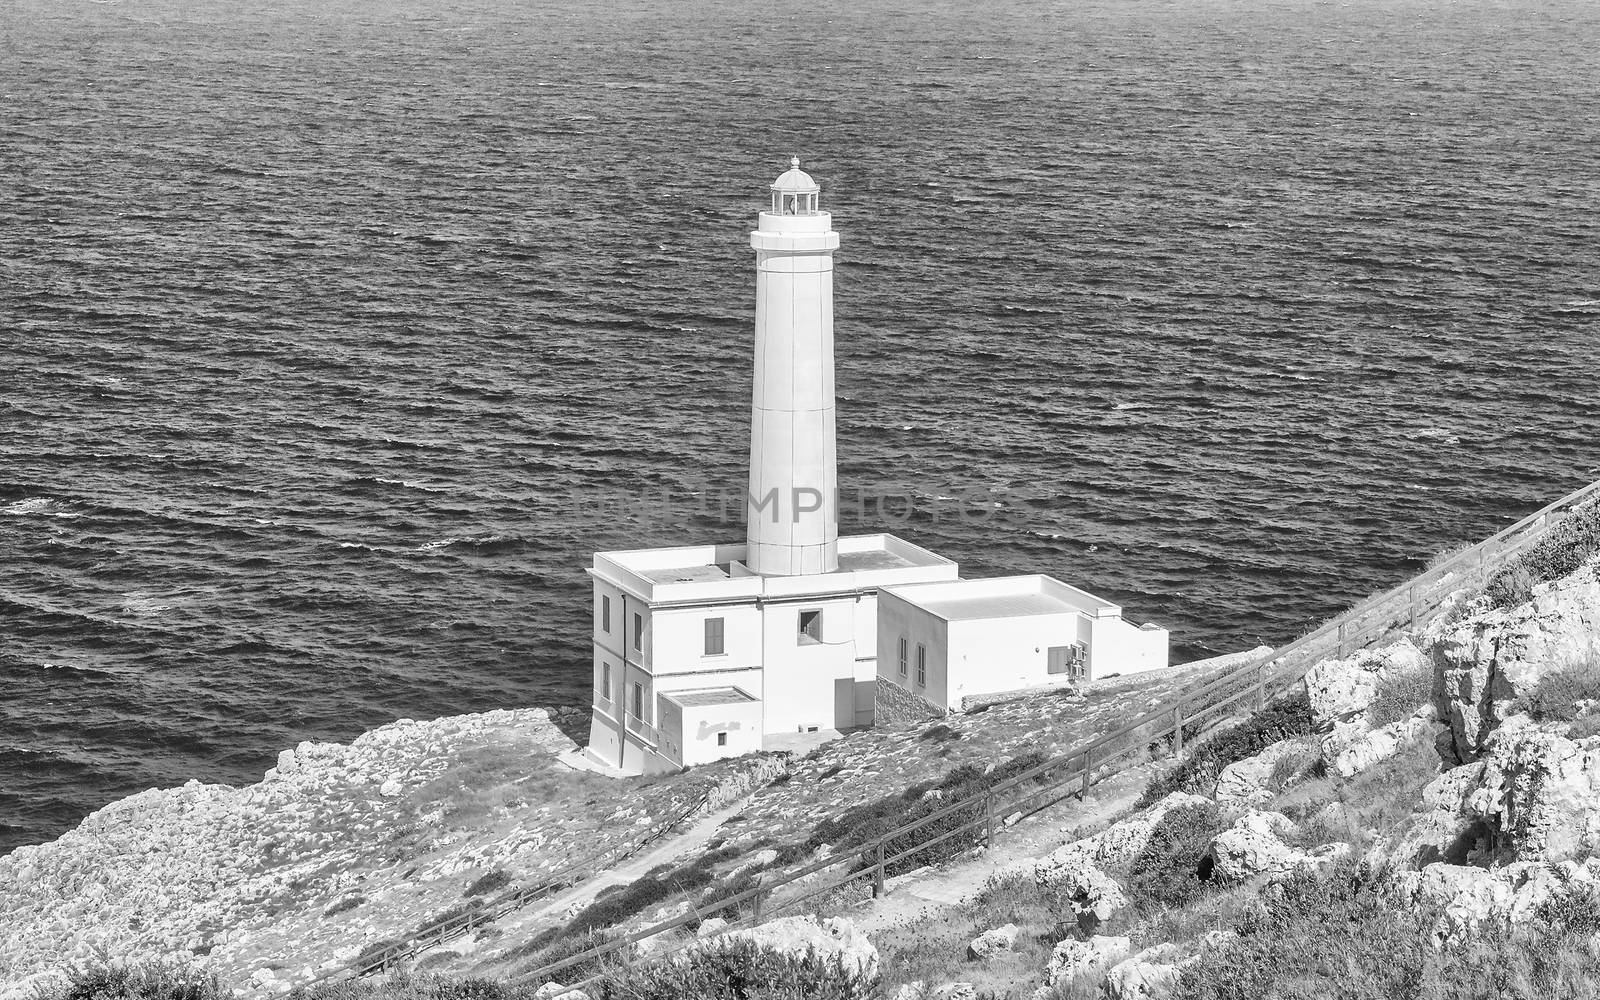 The iconic lighthouse of Capo d'Otranto in Salento, Apulia, is Italy's most easterly point